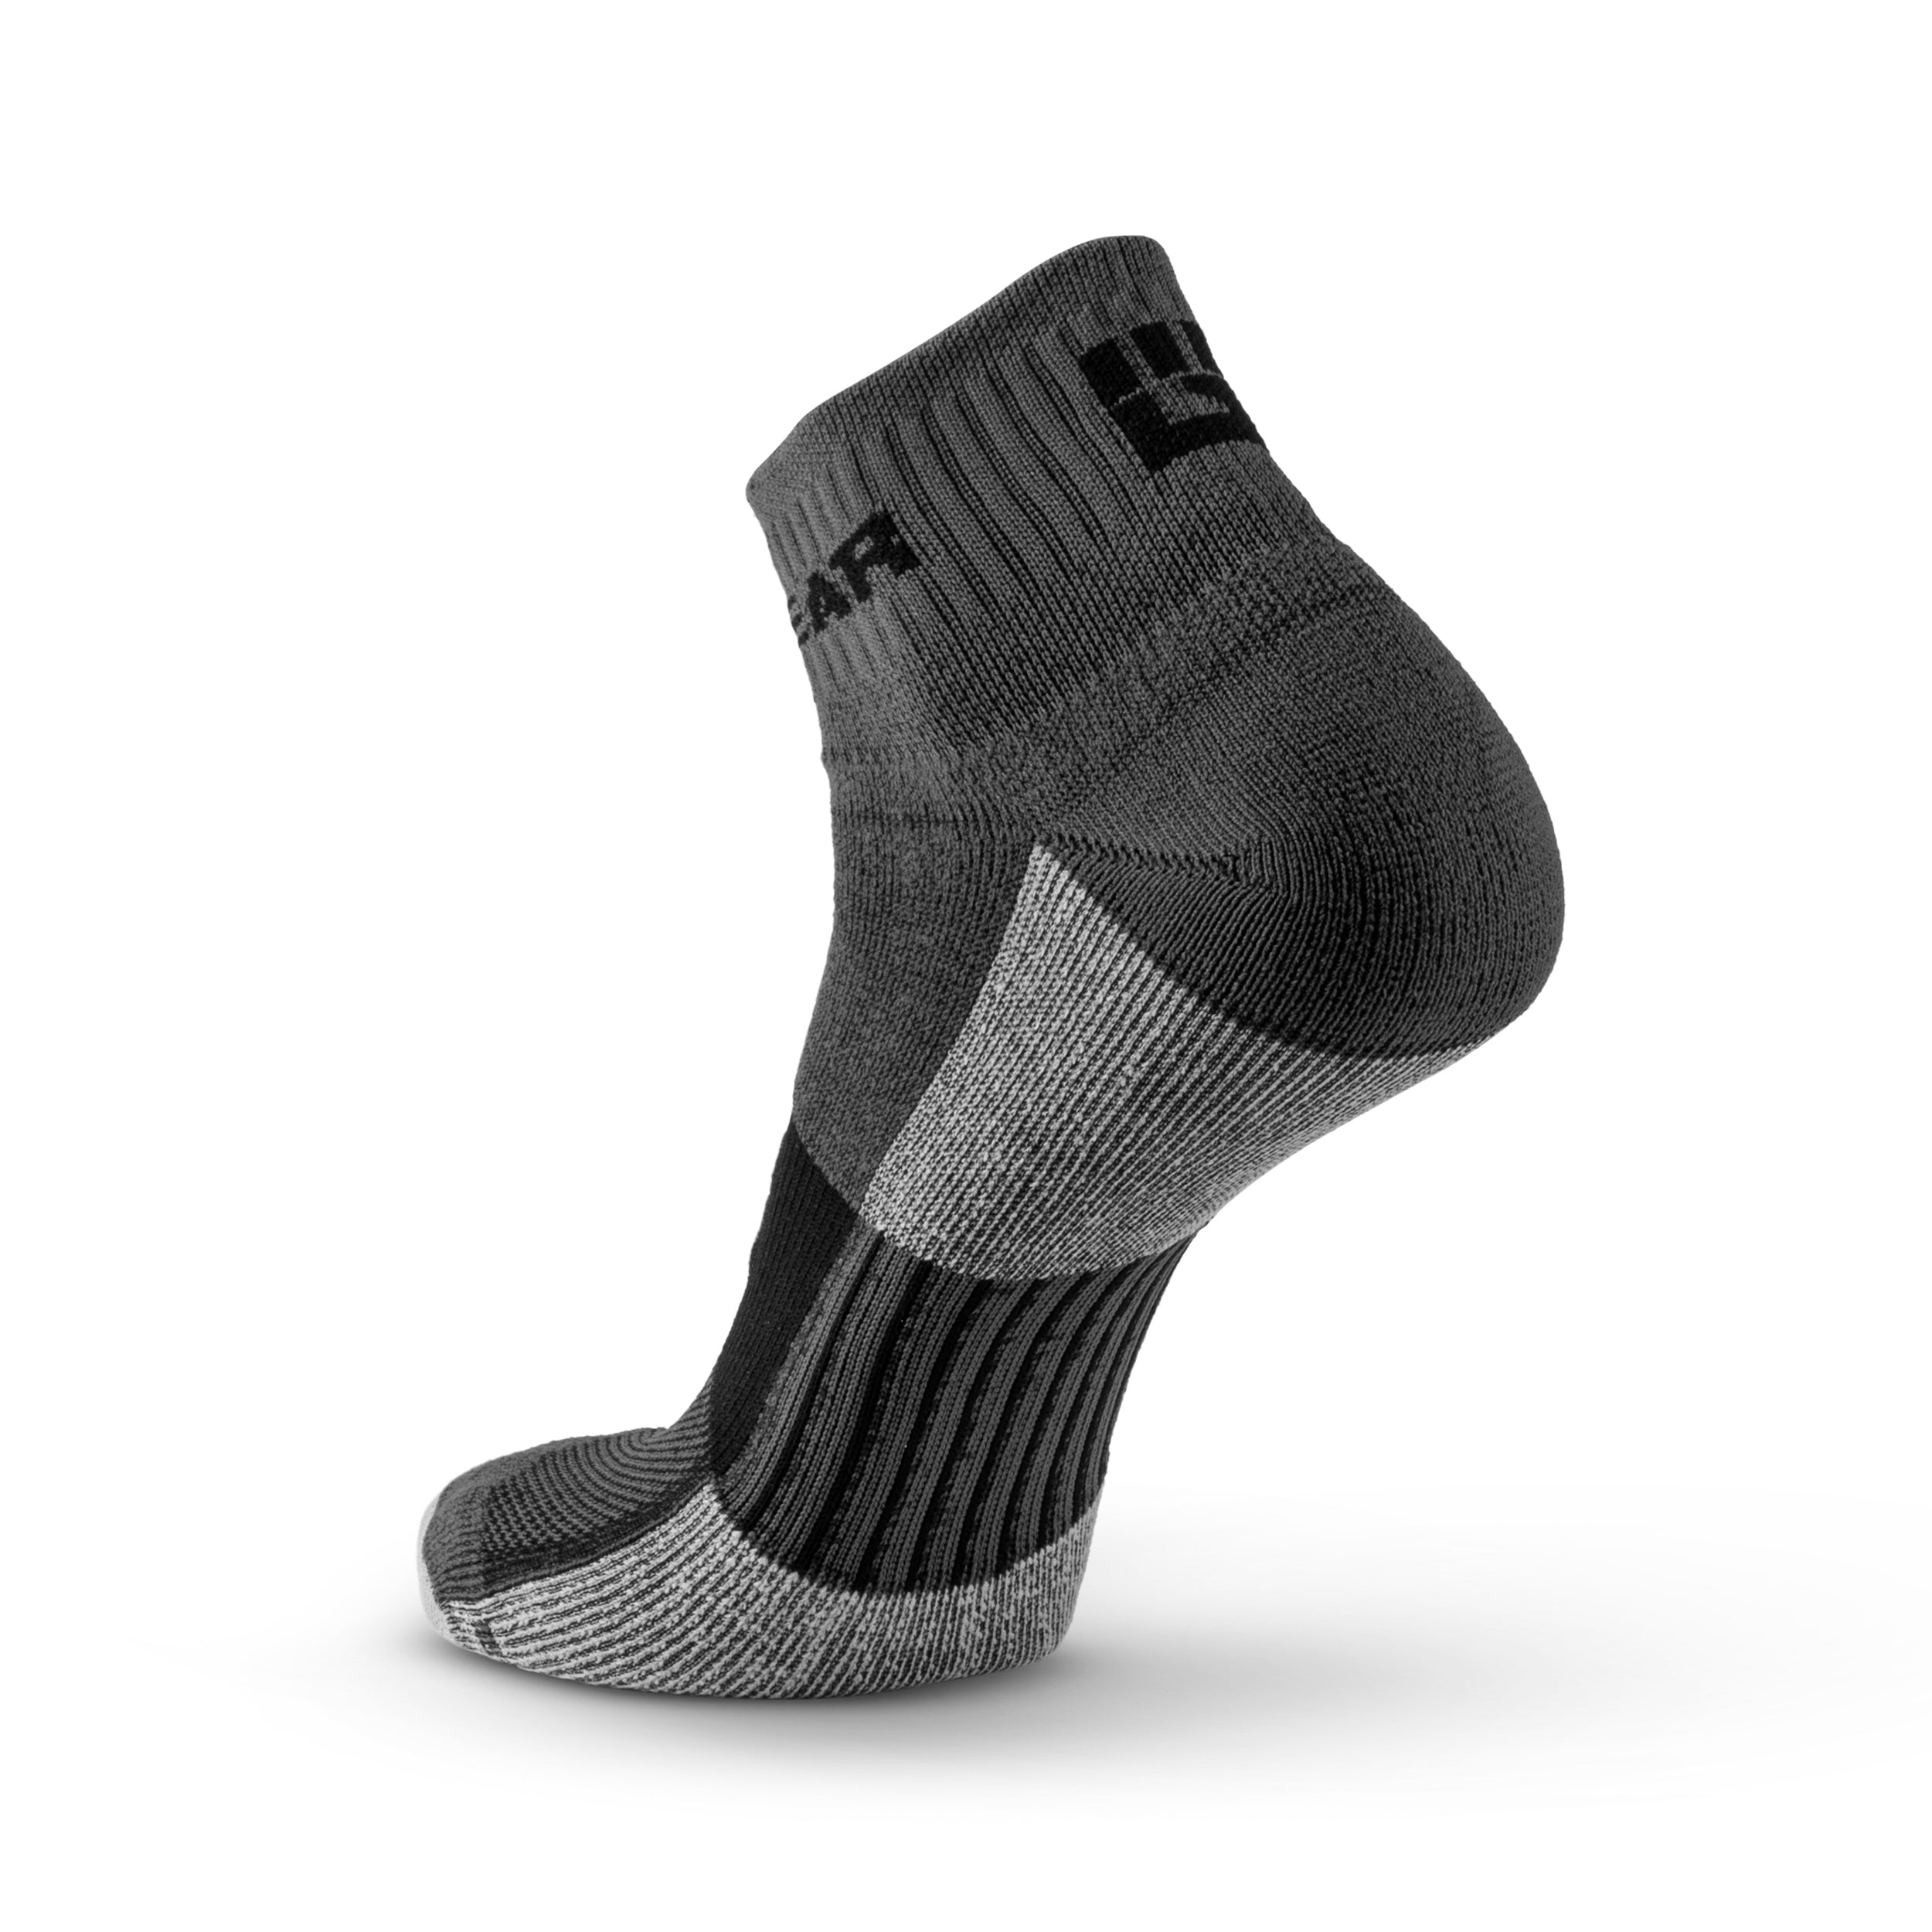 MudGear Tough Mud Run Socks For Trail Running and Obstacle Races